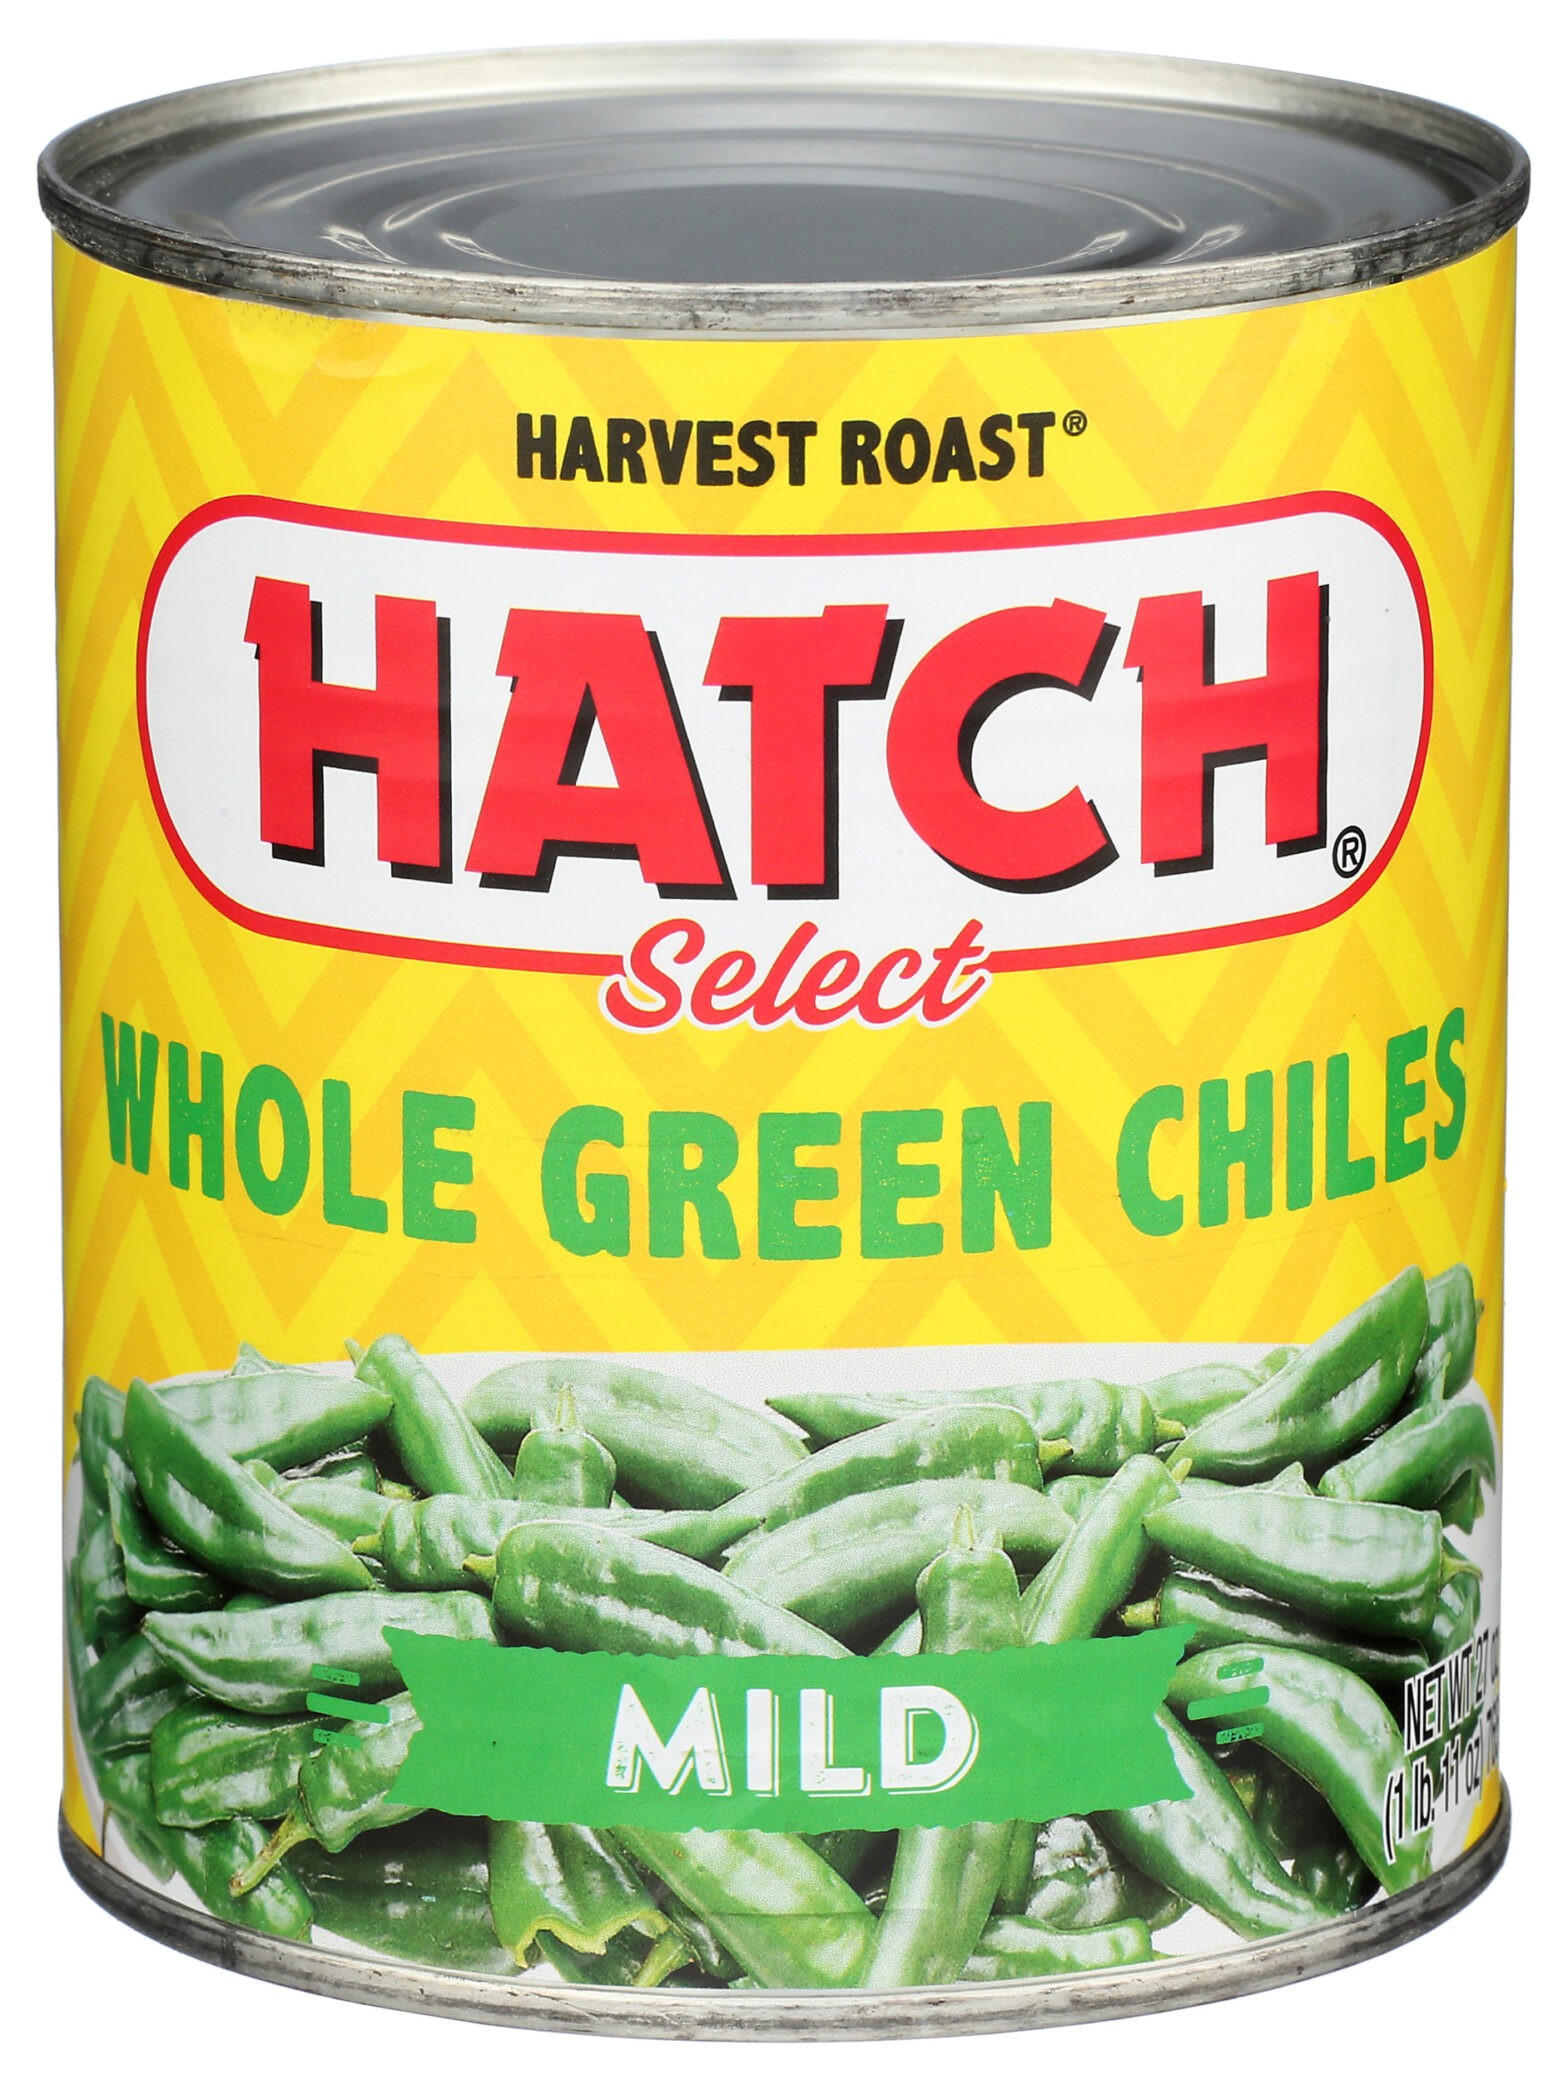 Featured image for post: Whole Green Chiles